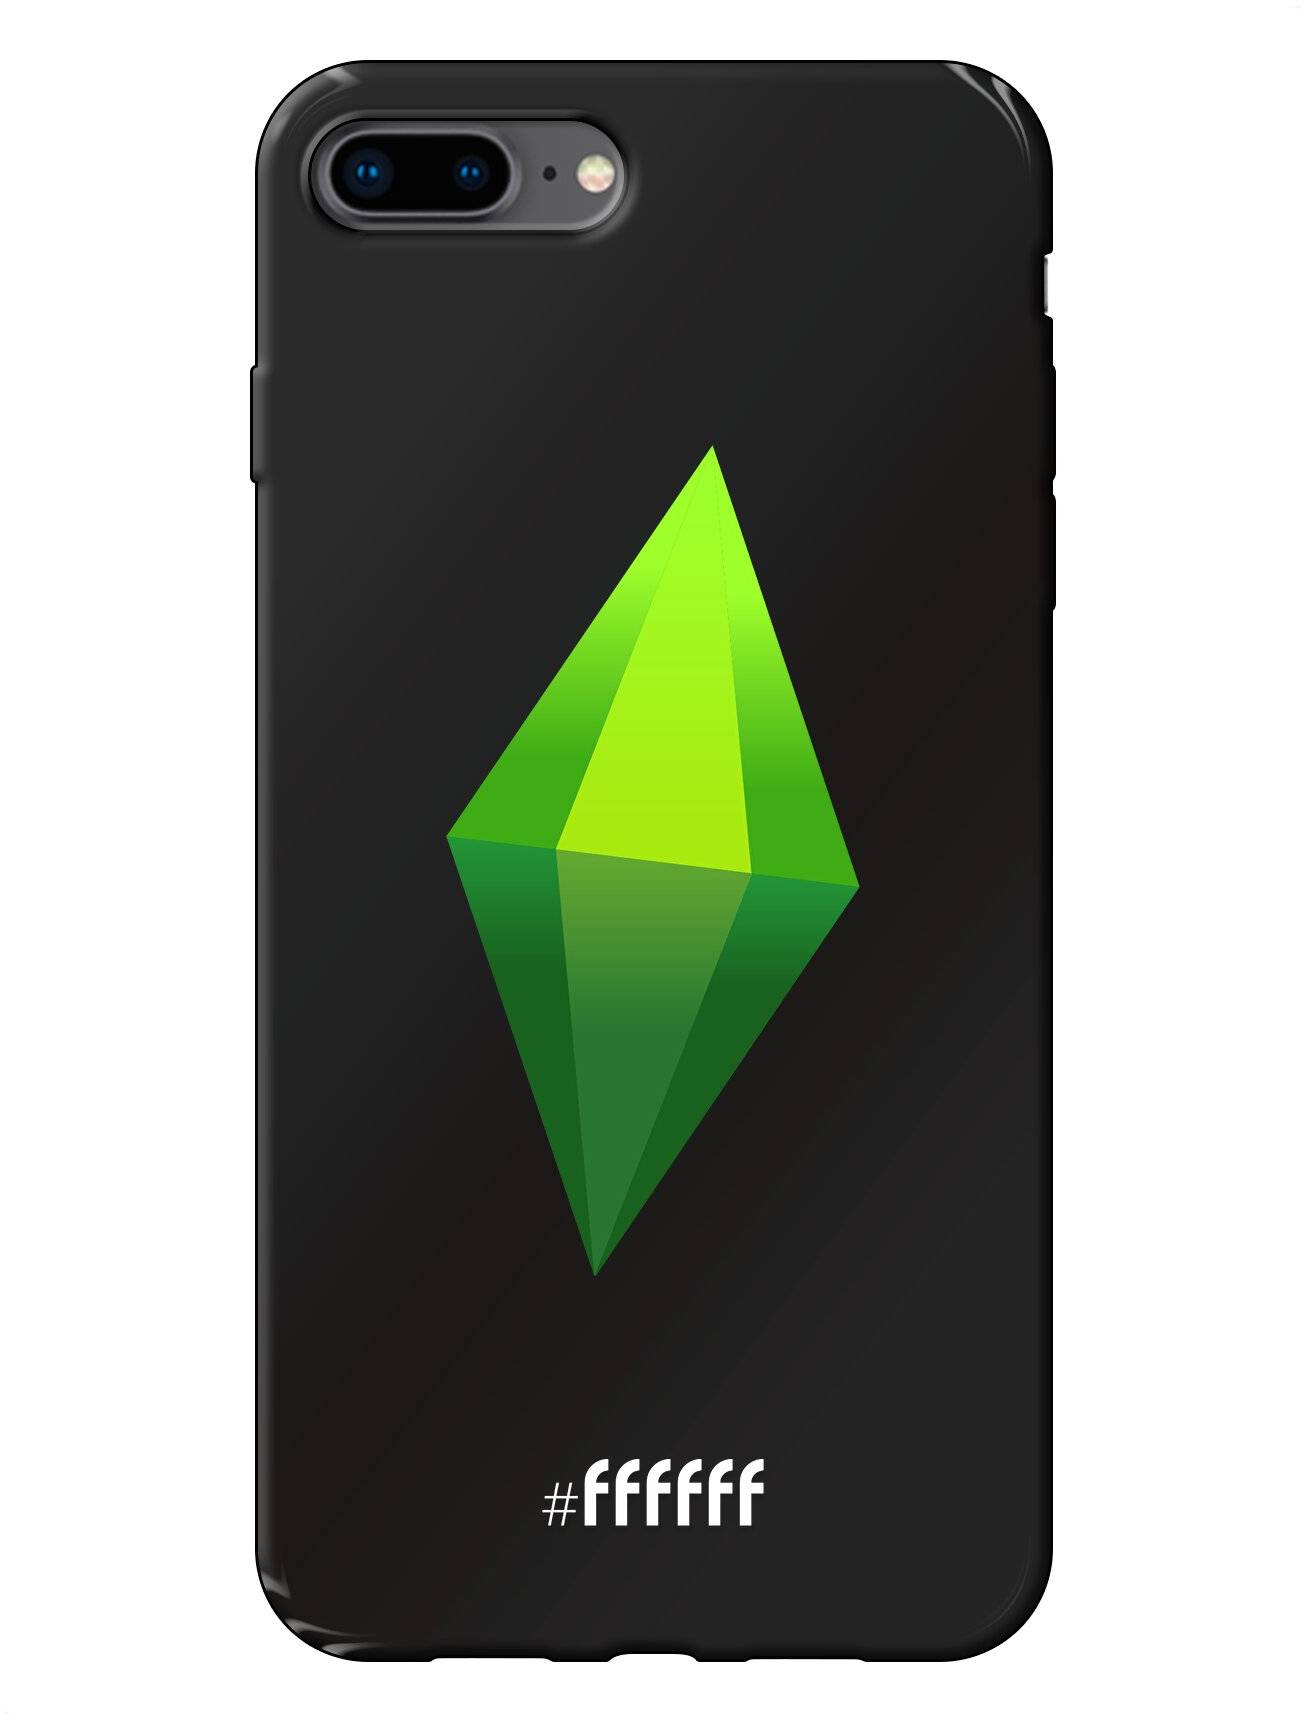 The Sims iPhone 8 Plus